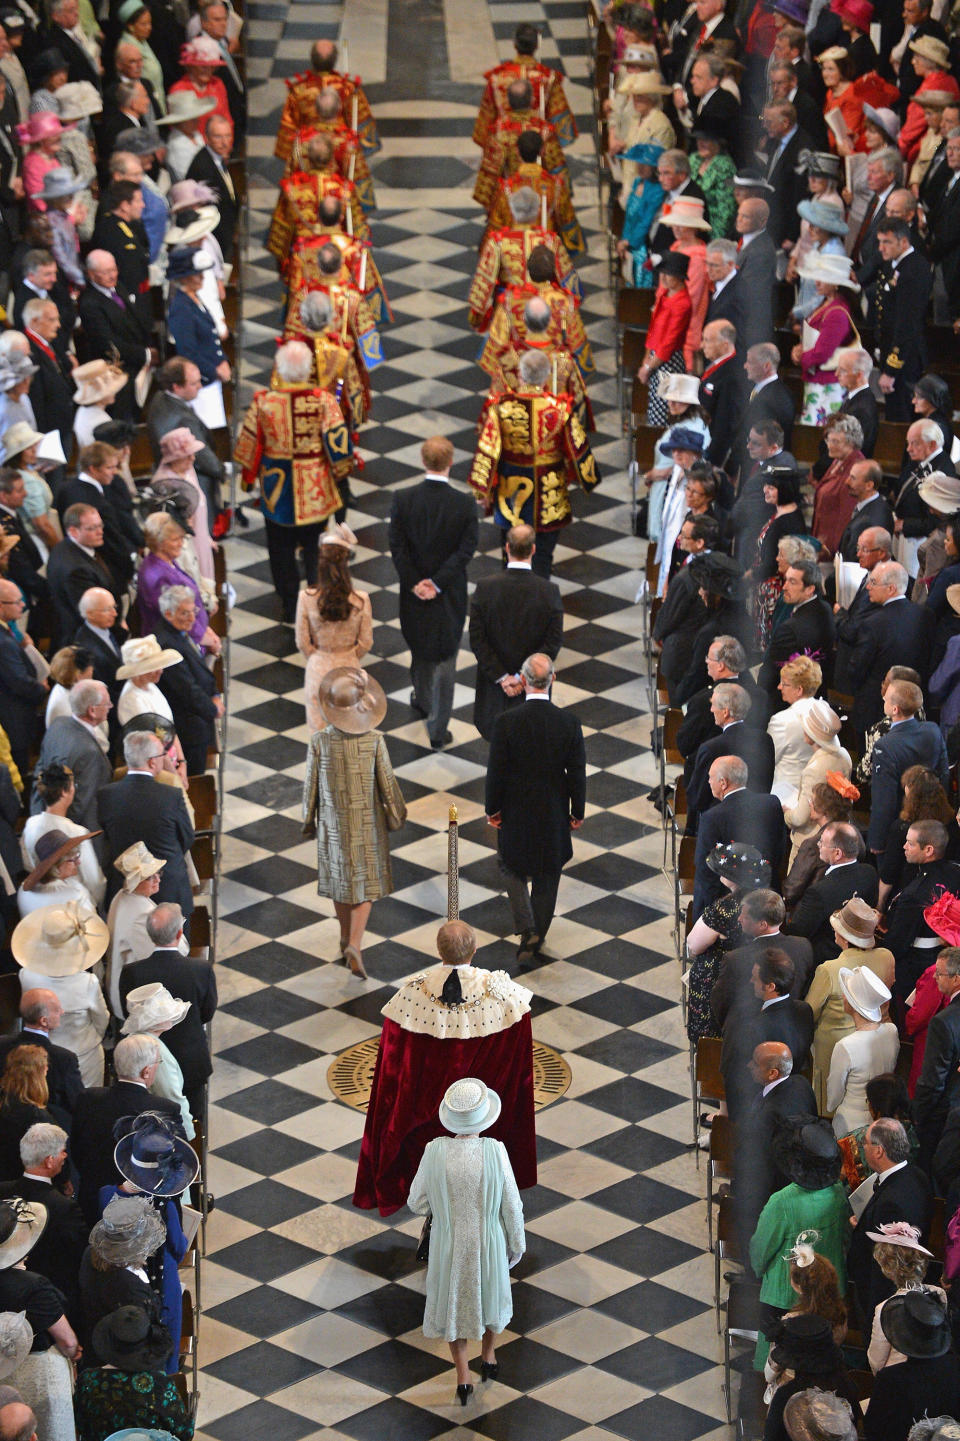 Britain's Queen Elizabeth II, foreground centre, arrives inside St Paul's Cathedral for a service of thanksgiving during Diamond Jubilee celebrations on Tuesday  June 5, 2012 in London. (AP Photo/Jeff J Mitchell, Pool)